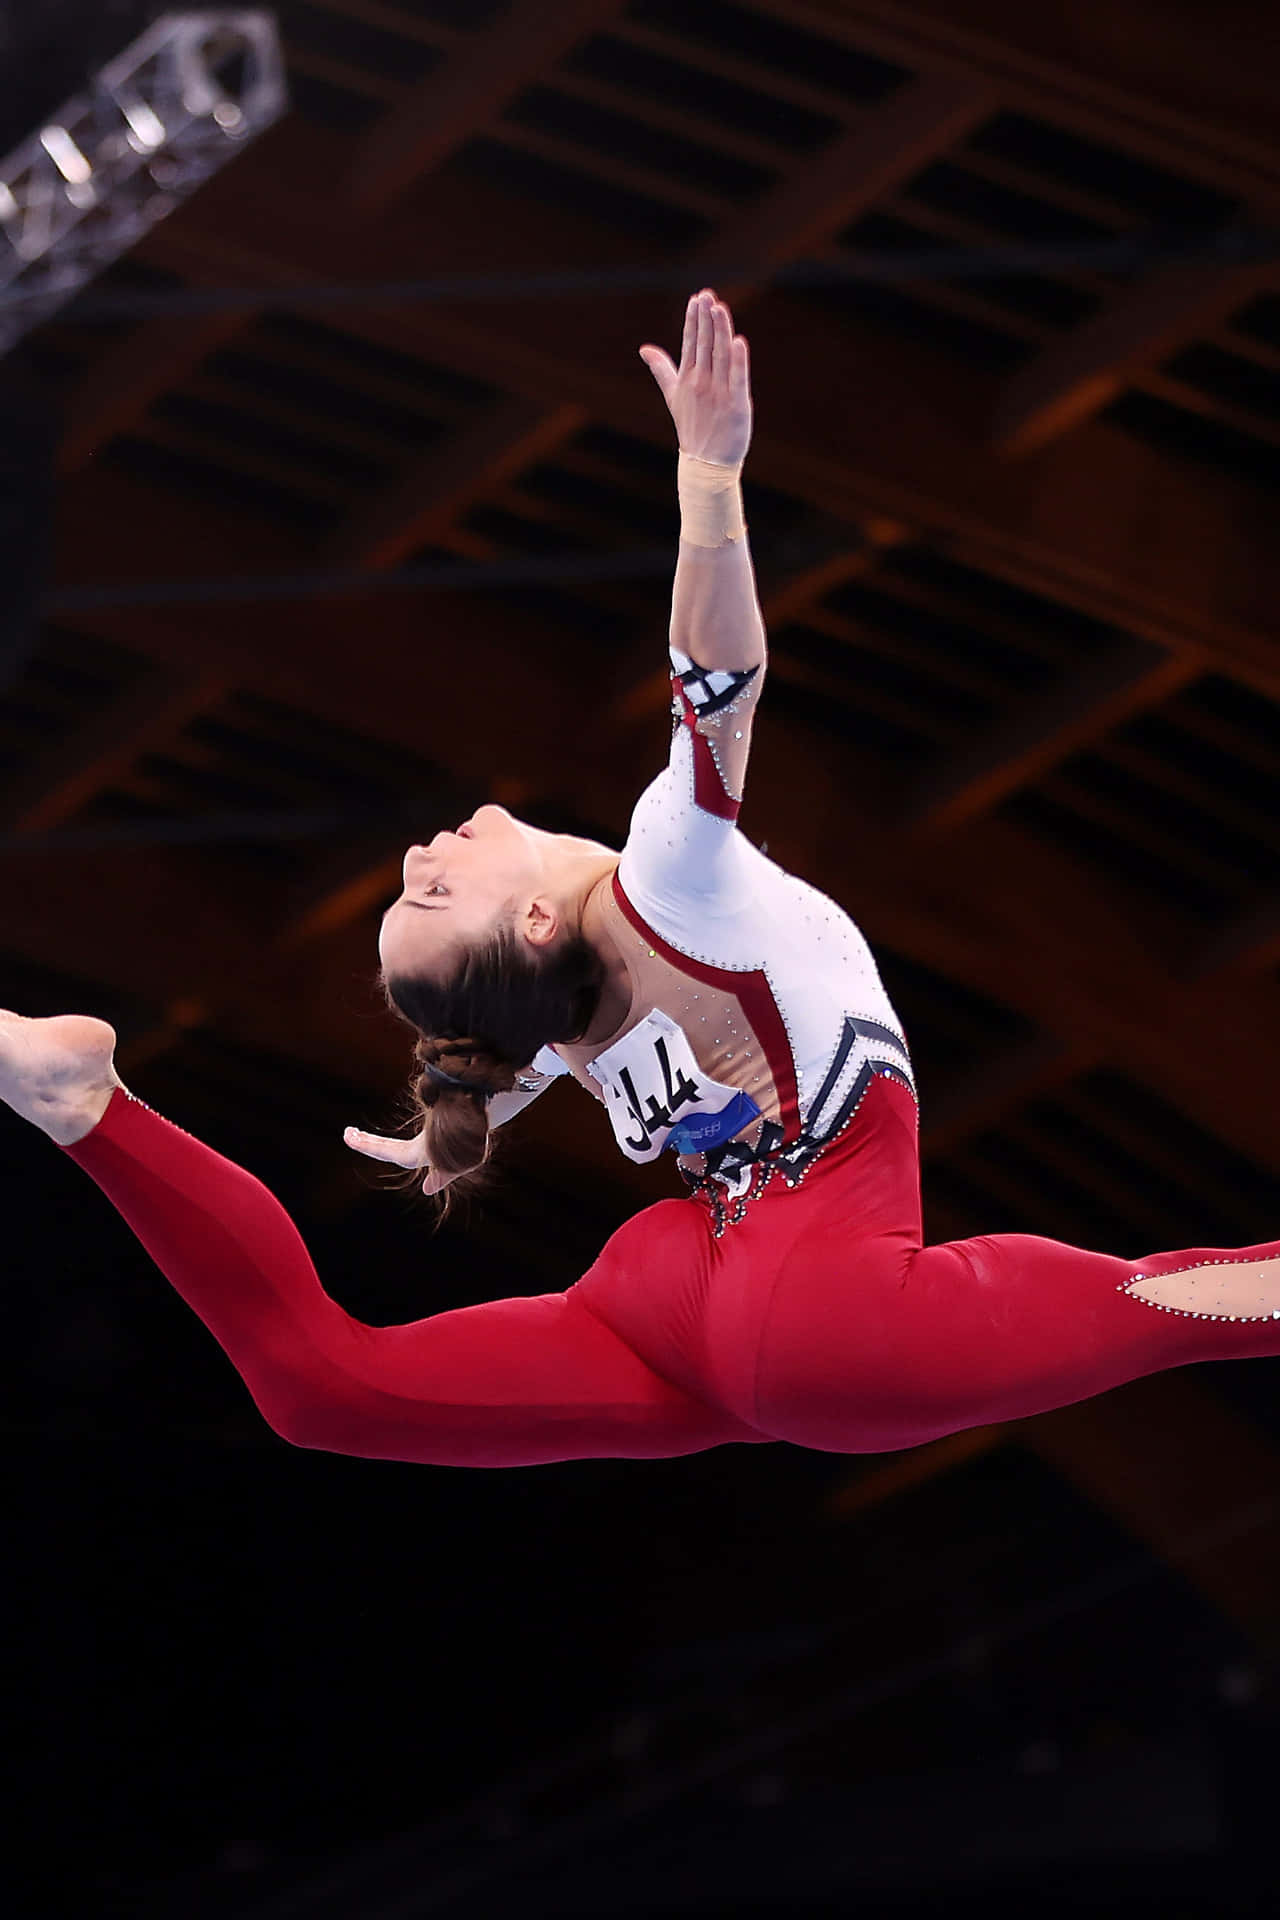 Get ready to flip the world with gymnastics